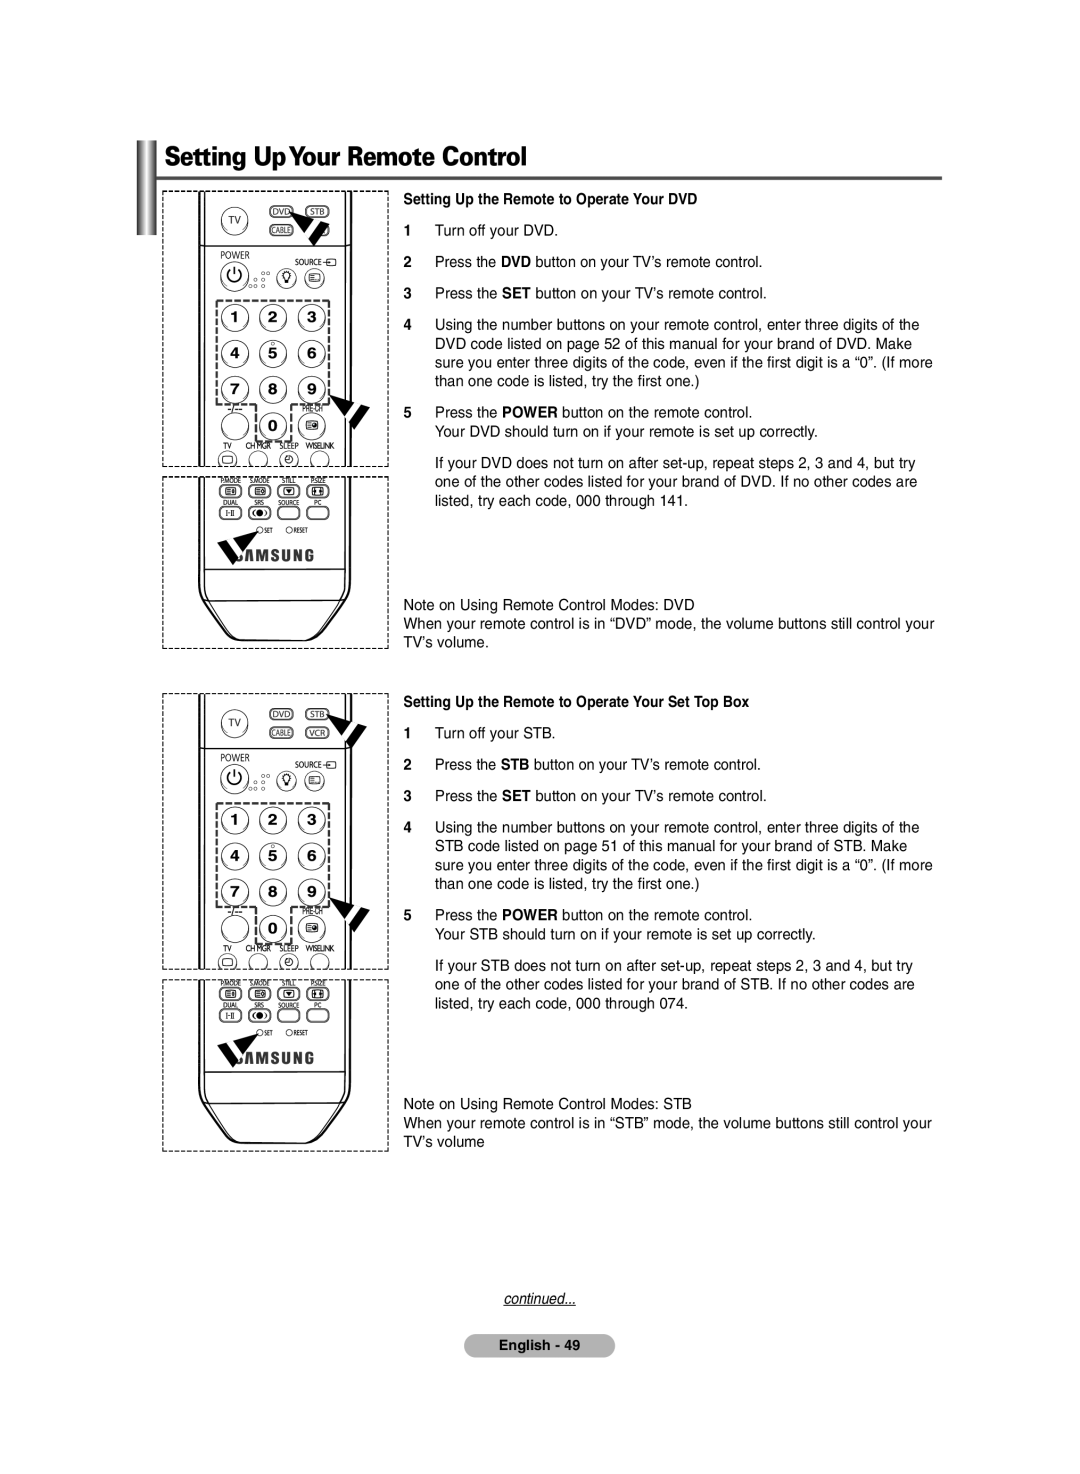 Samsung PDP-TELEVISION manual Setting UpYour Remote Control, Setting Up the Remote to Operate Your DVD 1 Turn off your DVD 